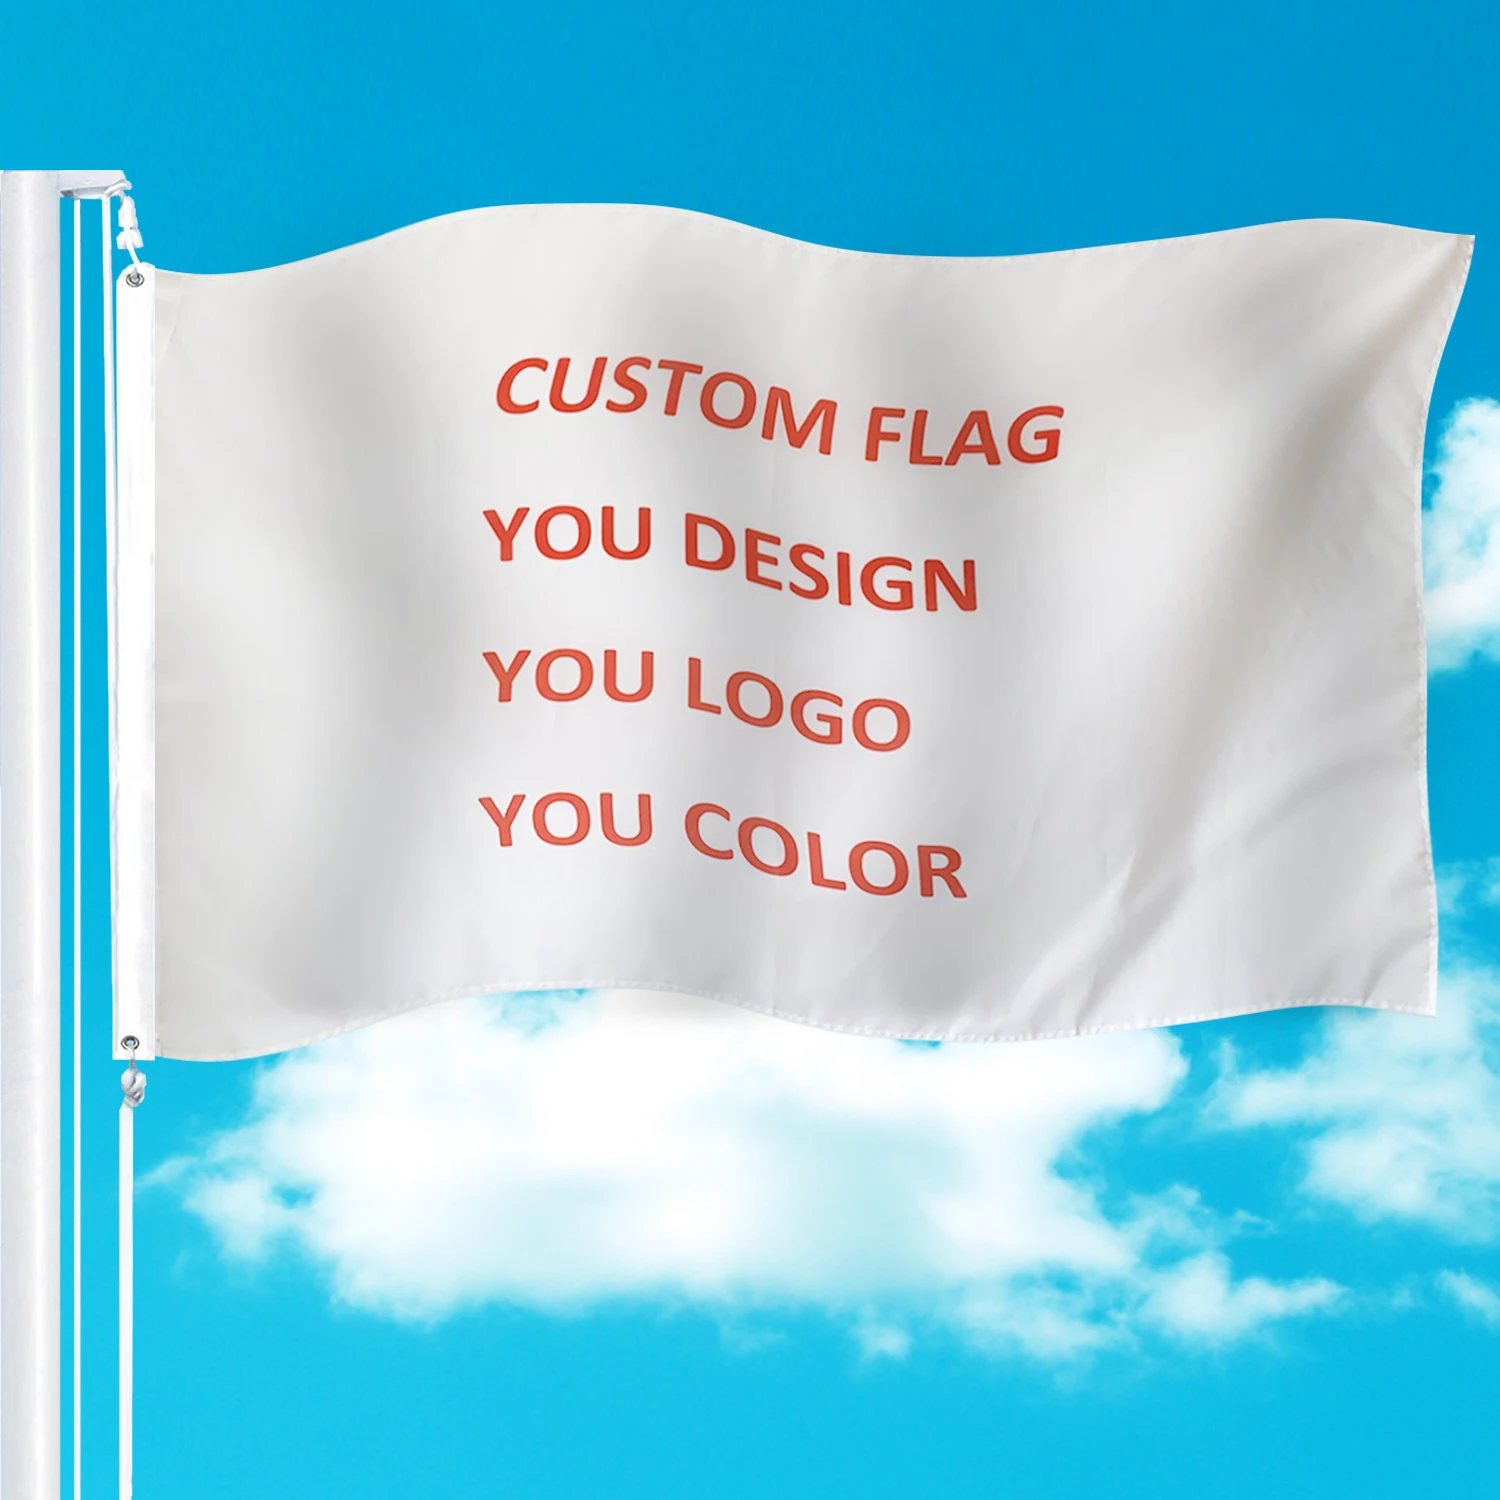 
China factories wholesale 3x5ft large national flag outdoor all country custom design cheap price flags 